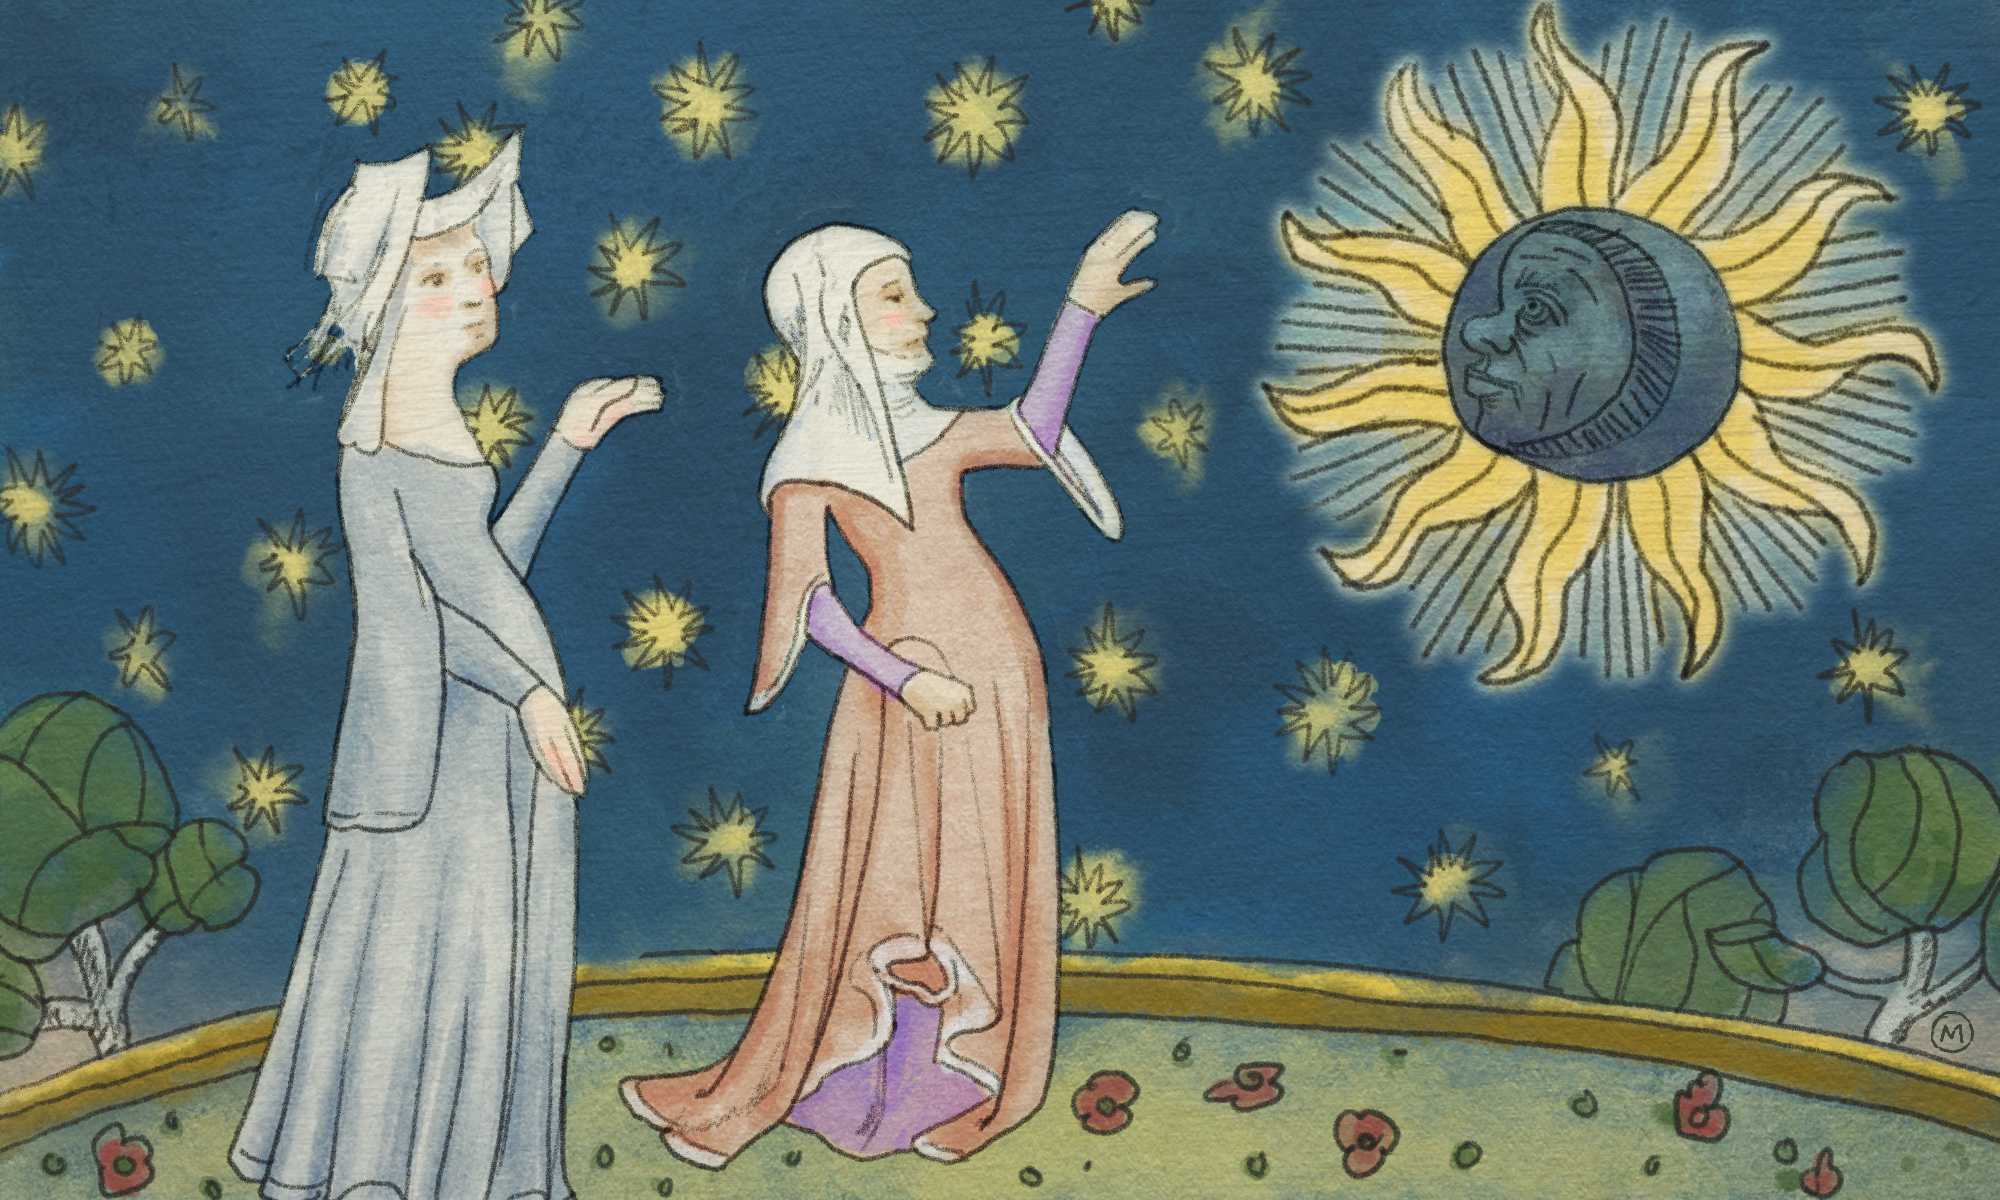 Medieval era-style illustration of two women during the Middle Ages looking at a solar eclipse while stars twinkle in the night sky.